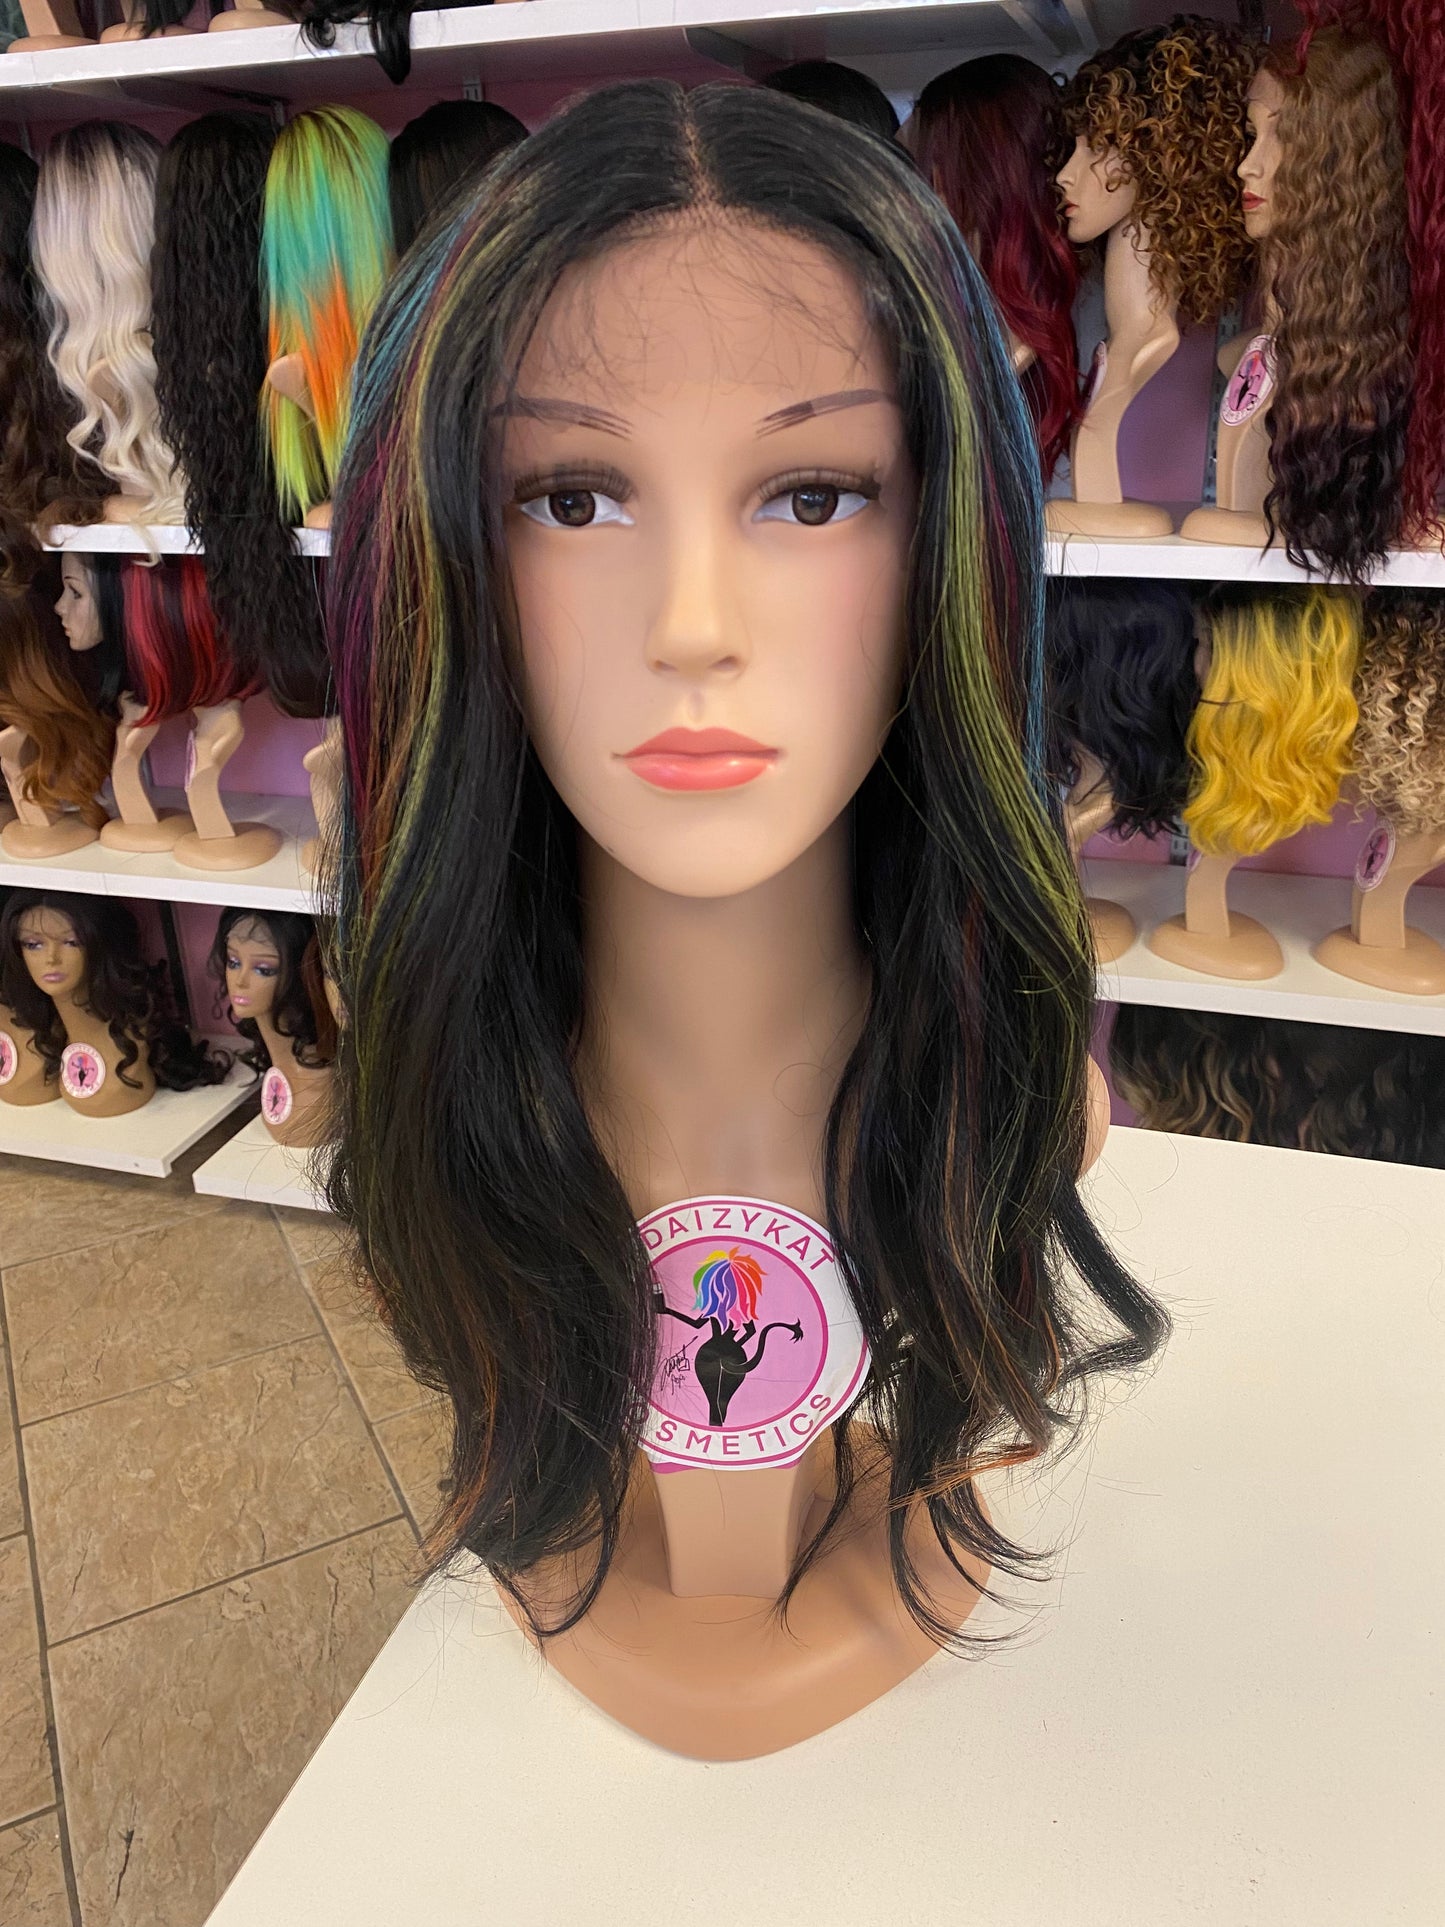 403 Harper - Middle Part Lace Front Wig - 1B/RAINBOW - DaizyKat Cosmetics 403 Harper - Middle Part Lace Front Wig - 1B/RAINBOW DaizyKat Cosmetics Wigs